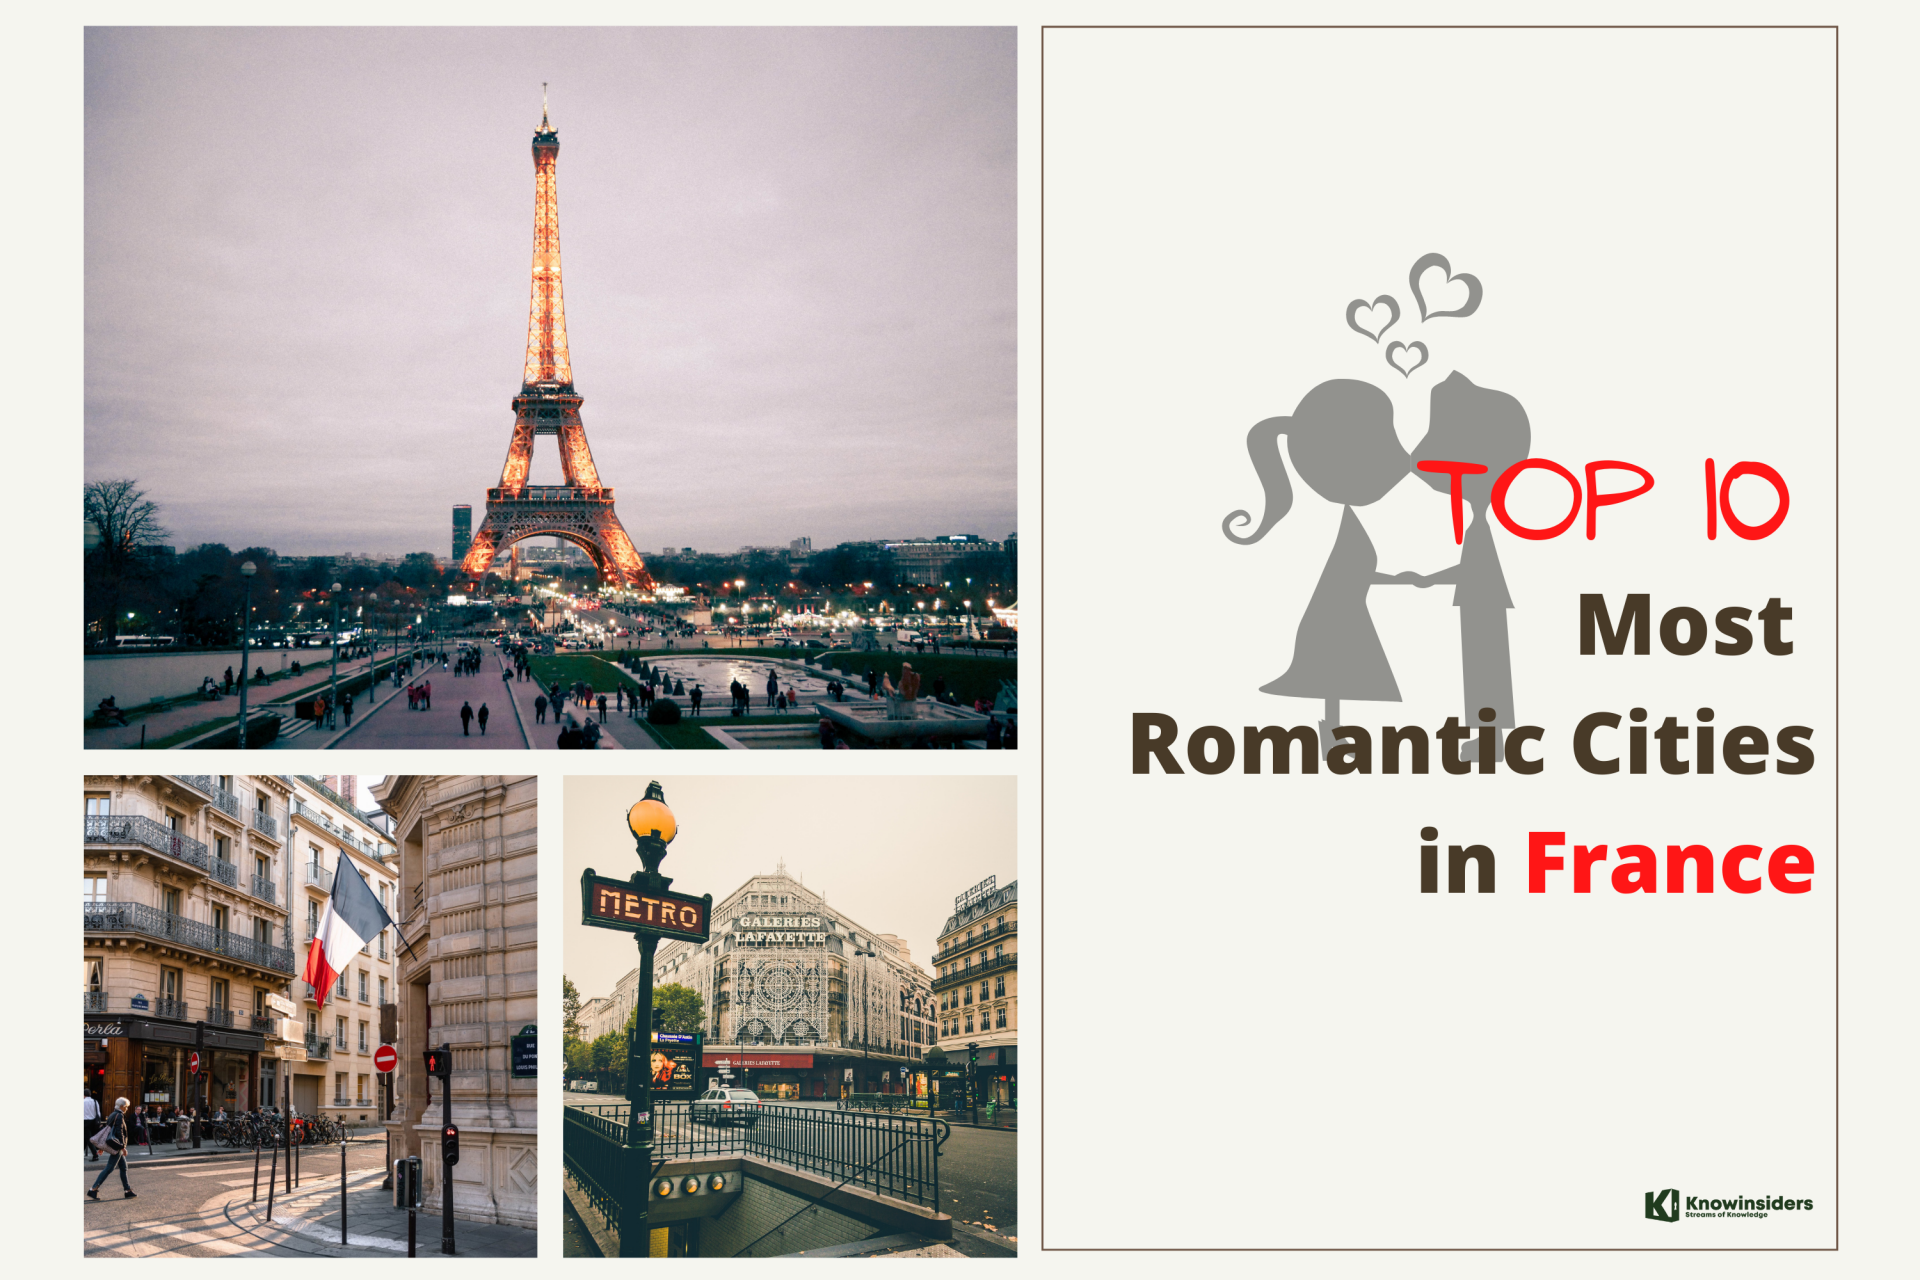 Top 10 Most Romantic Cities in France